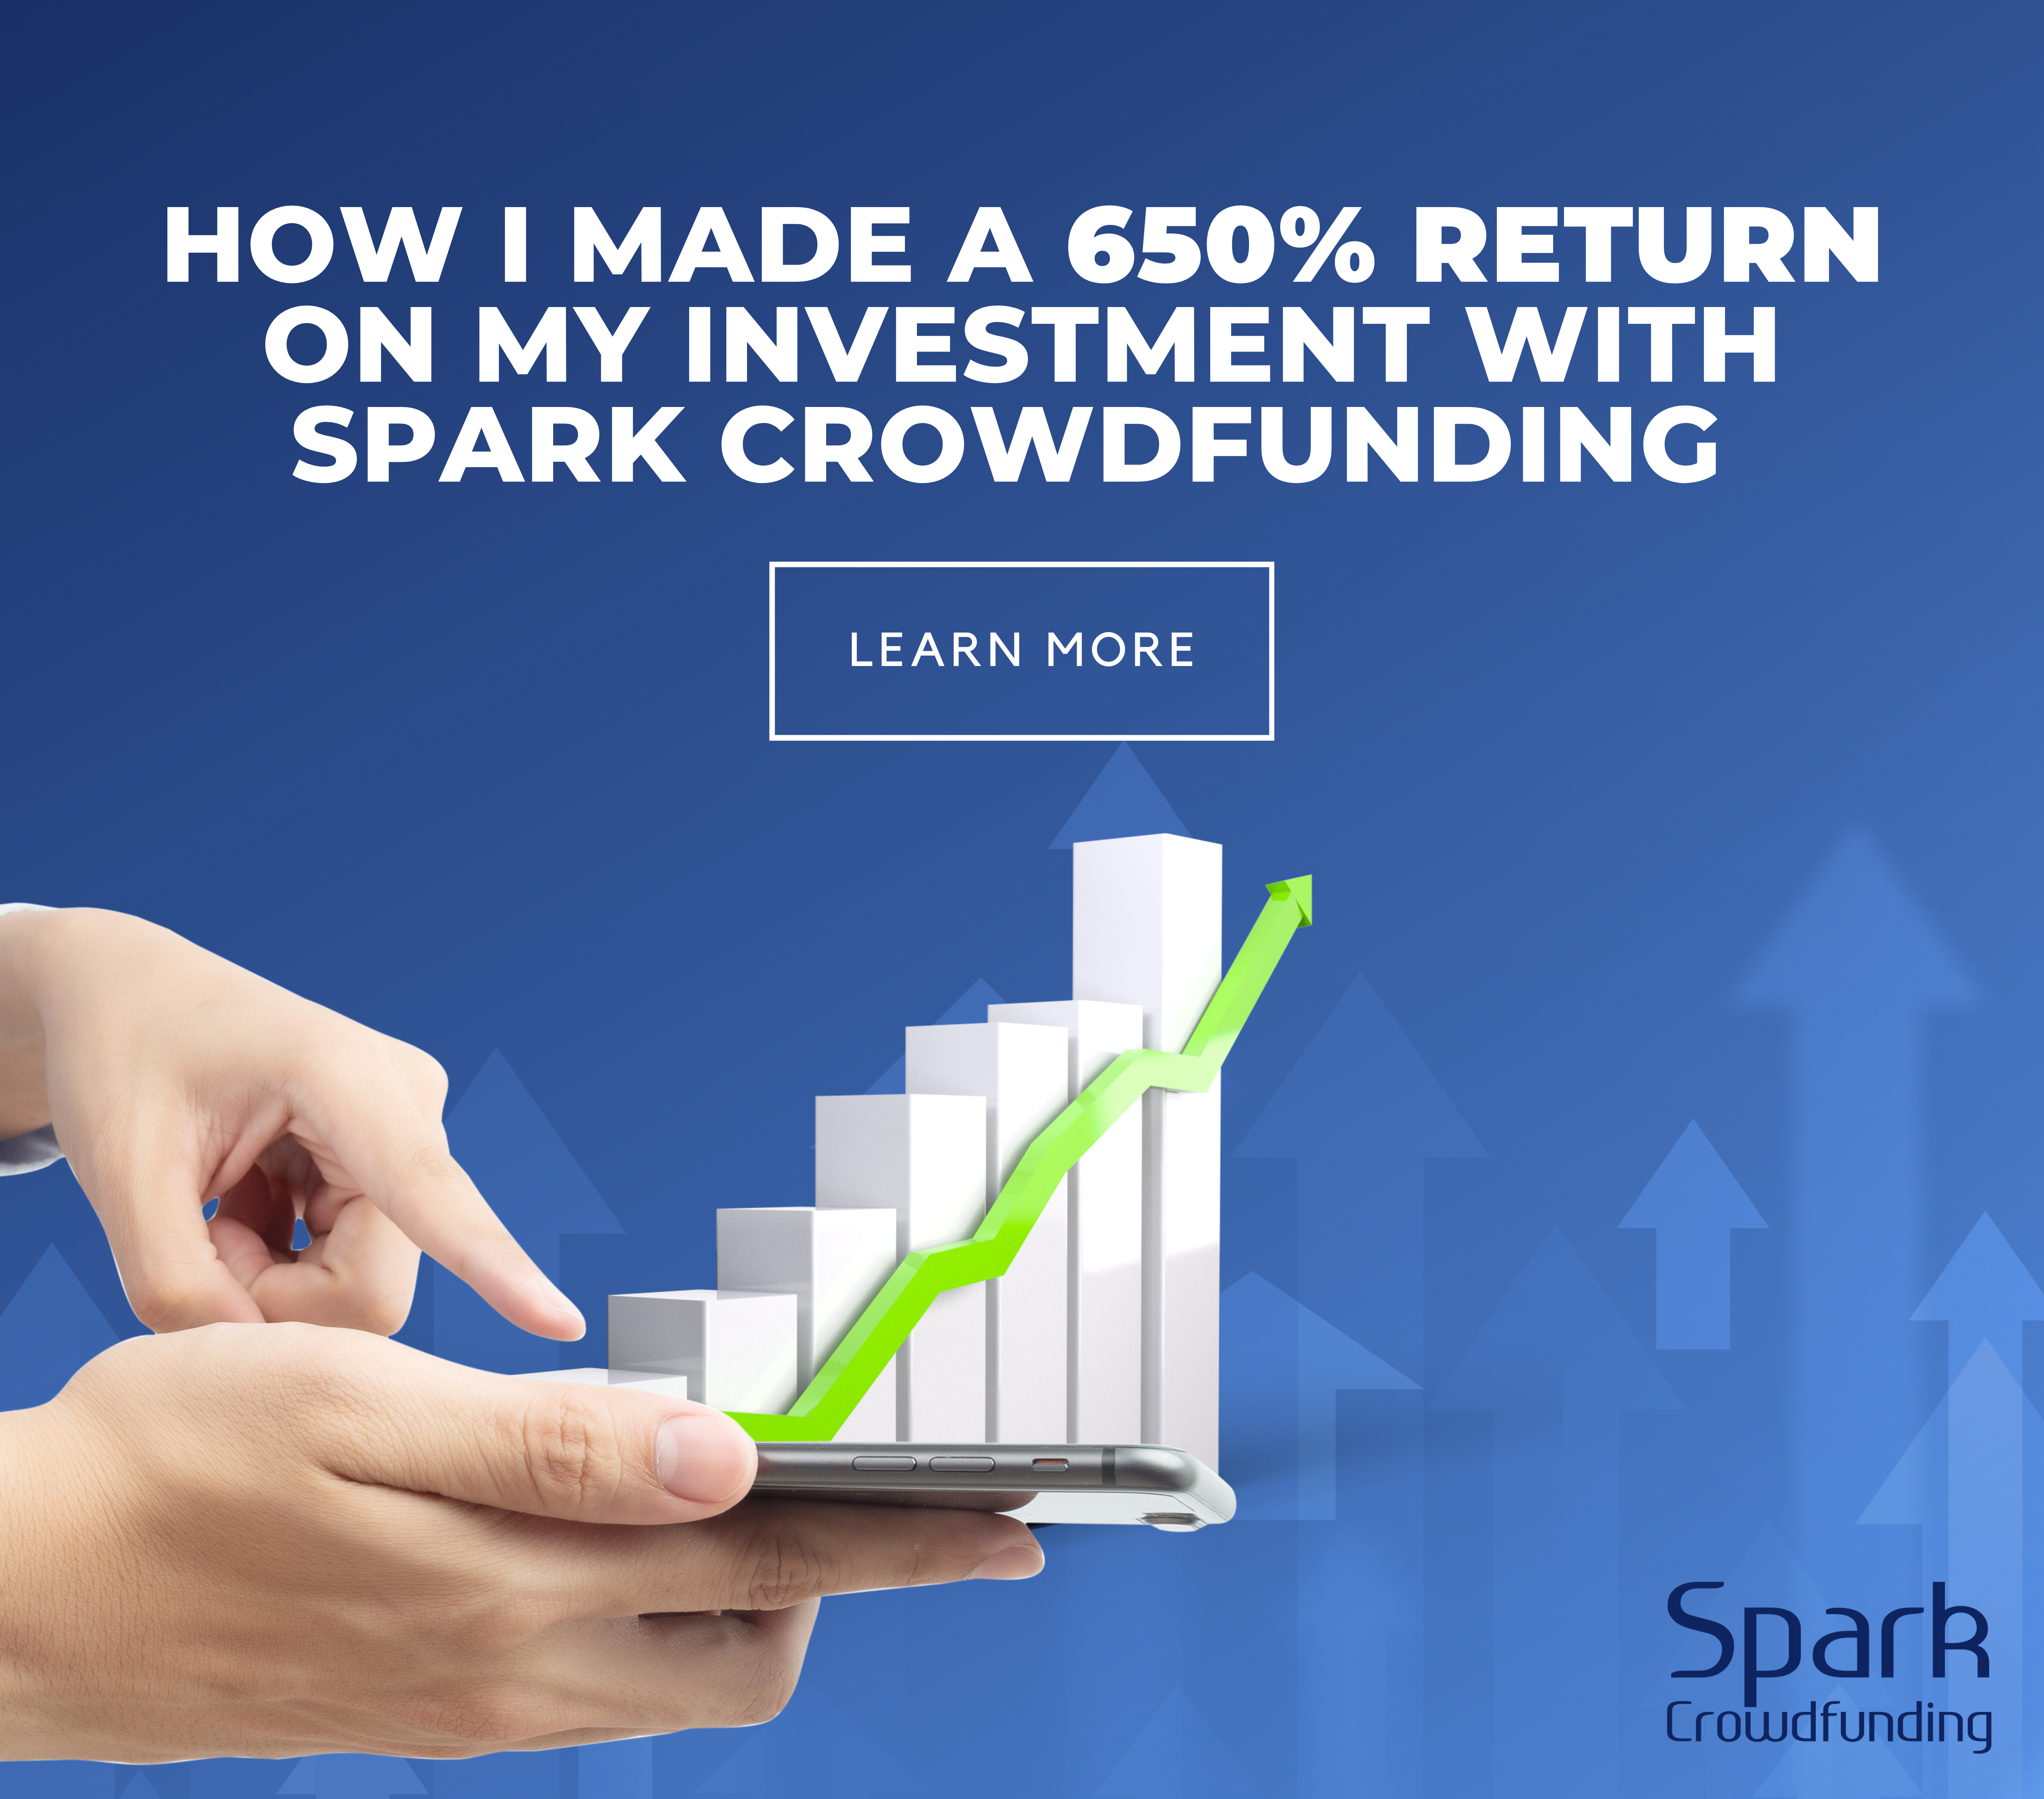 Spark Crowdfunding - Equity Crowdfunding Campaign Successes by